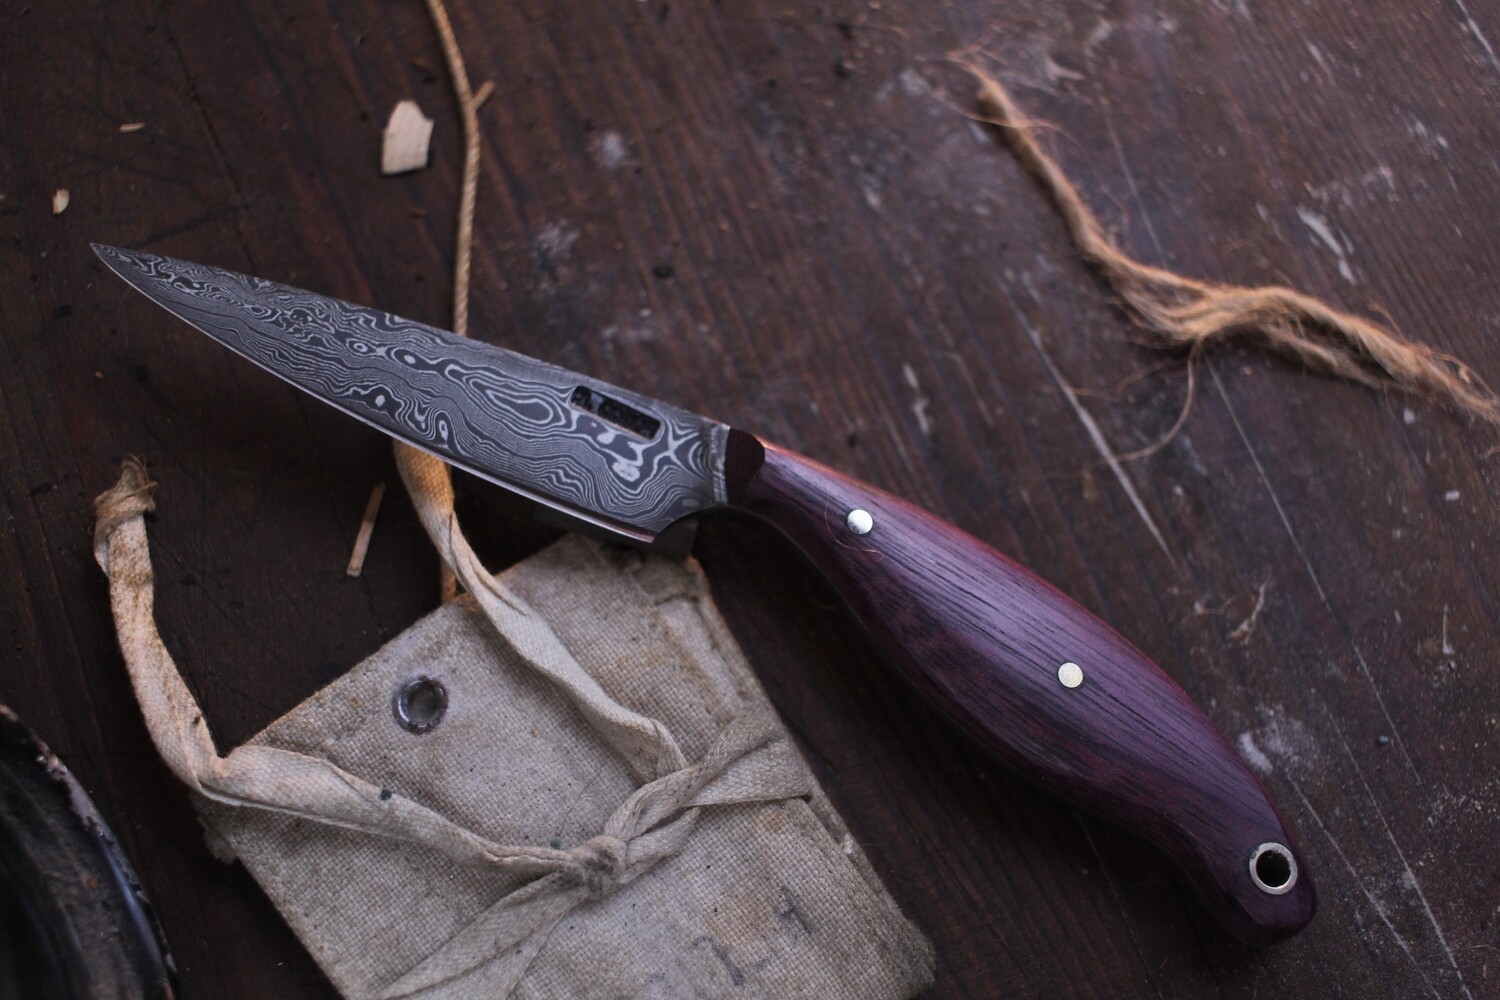 Mark Couch 3.25” Fixed Blade Capper / Purple Heartwood / Alaskan Forged 1095 & 15N20 Damascus